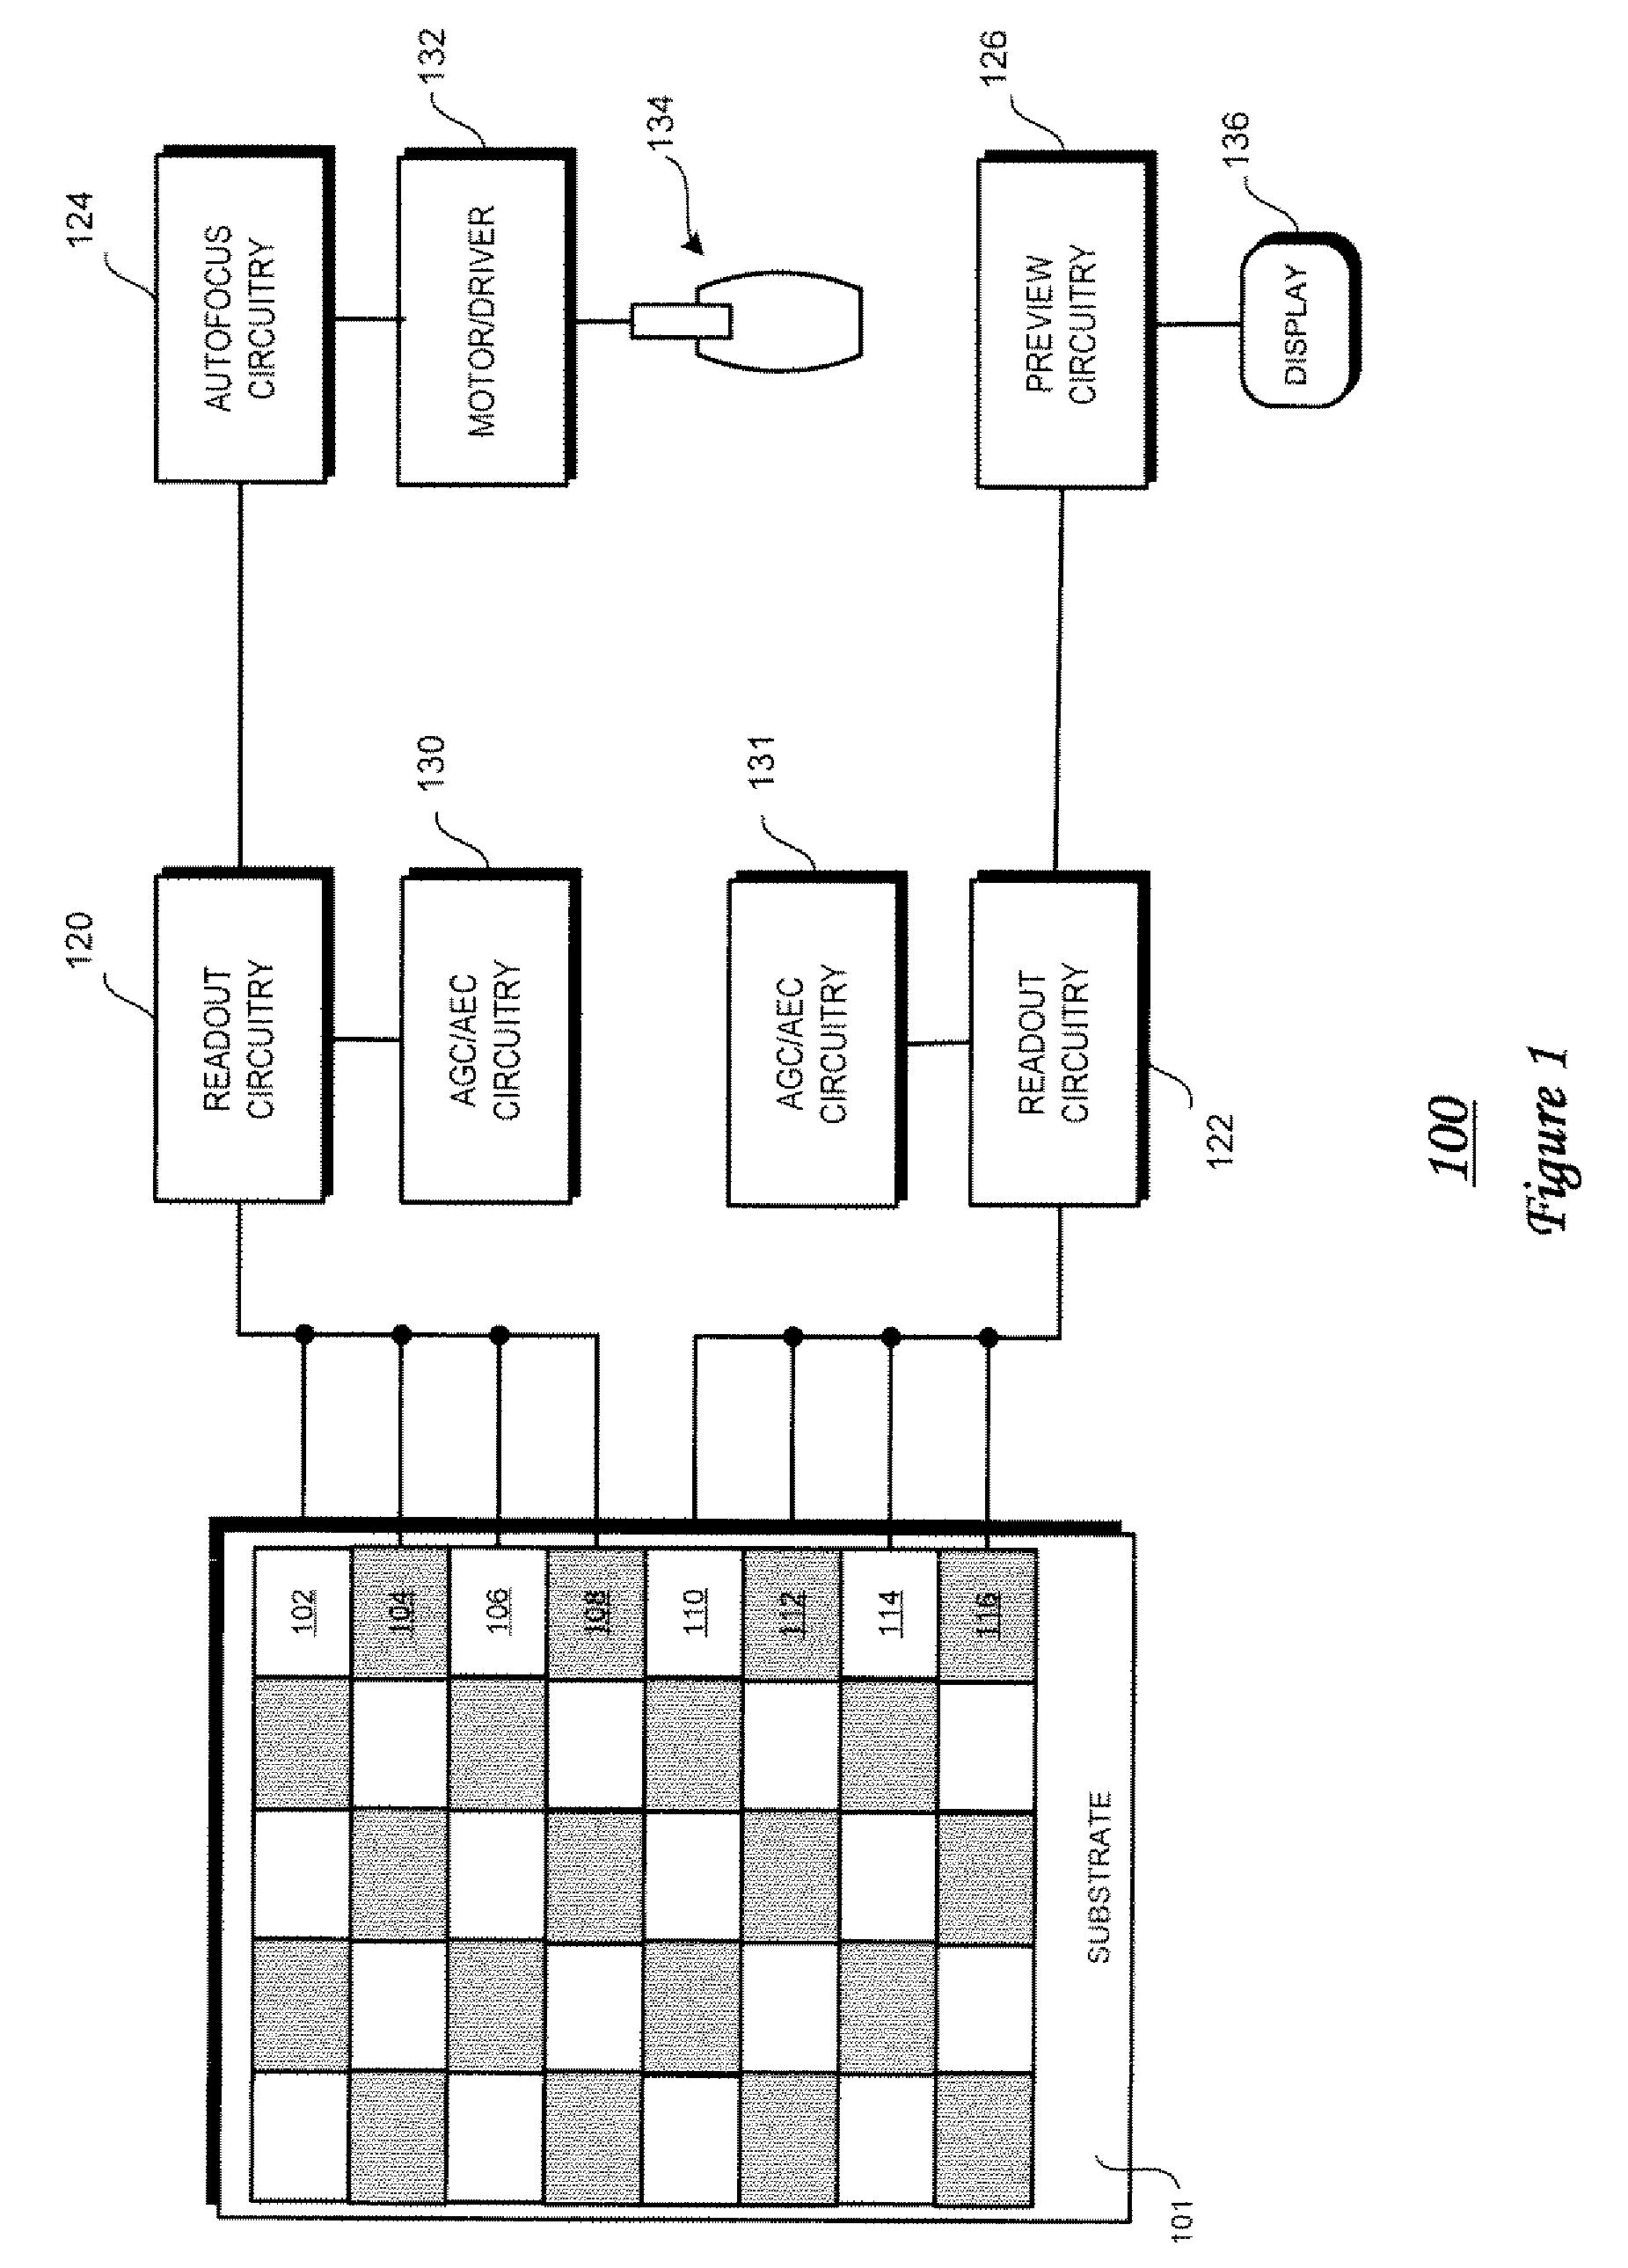 Image sensor with simultaneous auto-focus and image preview